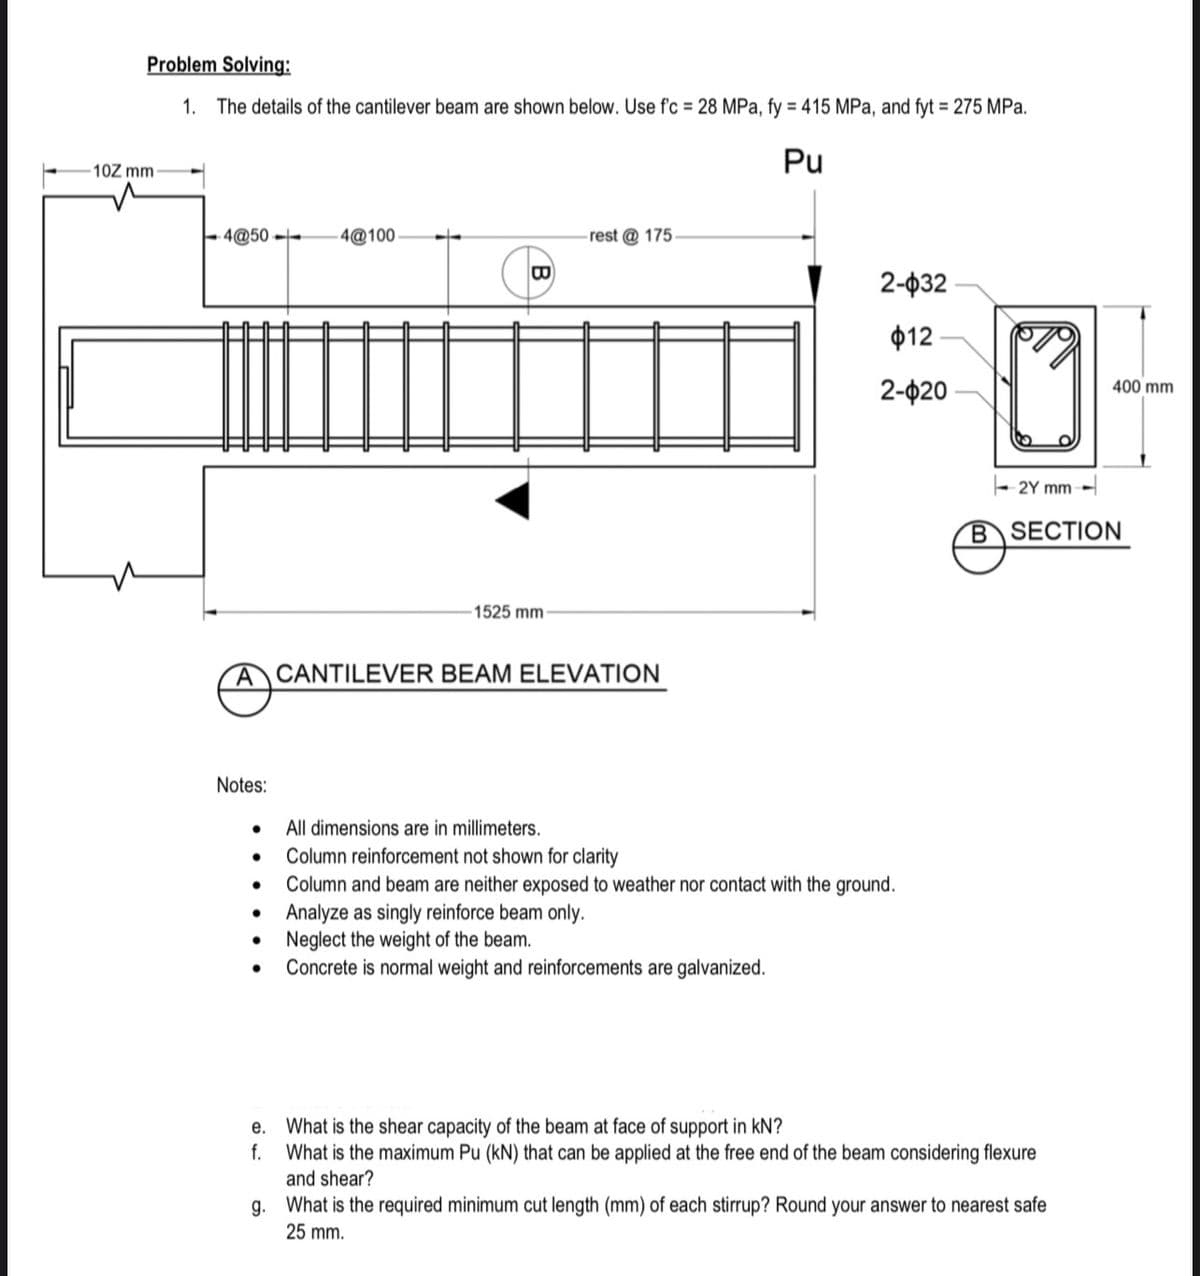 Problem Solving:
1. The details of the cantilever beam are shown below. Use f'c = 28 MPa, fy = 415 MPa, and fyt = 275 MPa.
Pu
10Z mm
E 4@50 --
- 4@100
rest @ 175
2-ф32
ф12
2-ф20
400 mm
- 2Y mm -
BSECTION
1525 mm
ACANTILEVER BEAM ELEVATION
Notes:
All dimensions are in millimeters.
Column reinforcement not shown for clarity
Column and beam are neither exposed to weather nor contact with the ground.
Analyze as singly reinforce beam only.
• Neglect the weight of the beam.
Concrete is normal weight and reinforcements are galvanized.
е.
What is the shear capacity of the beam at face of support in kN?
f.
What is the maximum Pu (kN) that can be applied at the free end of the beam considering flexure
and shear?
g. What is the required minimum cut length (mm) of each stirrup? Round your answer to nearest safe
25 mm.
